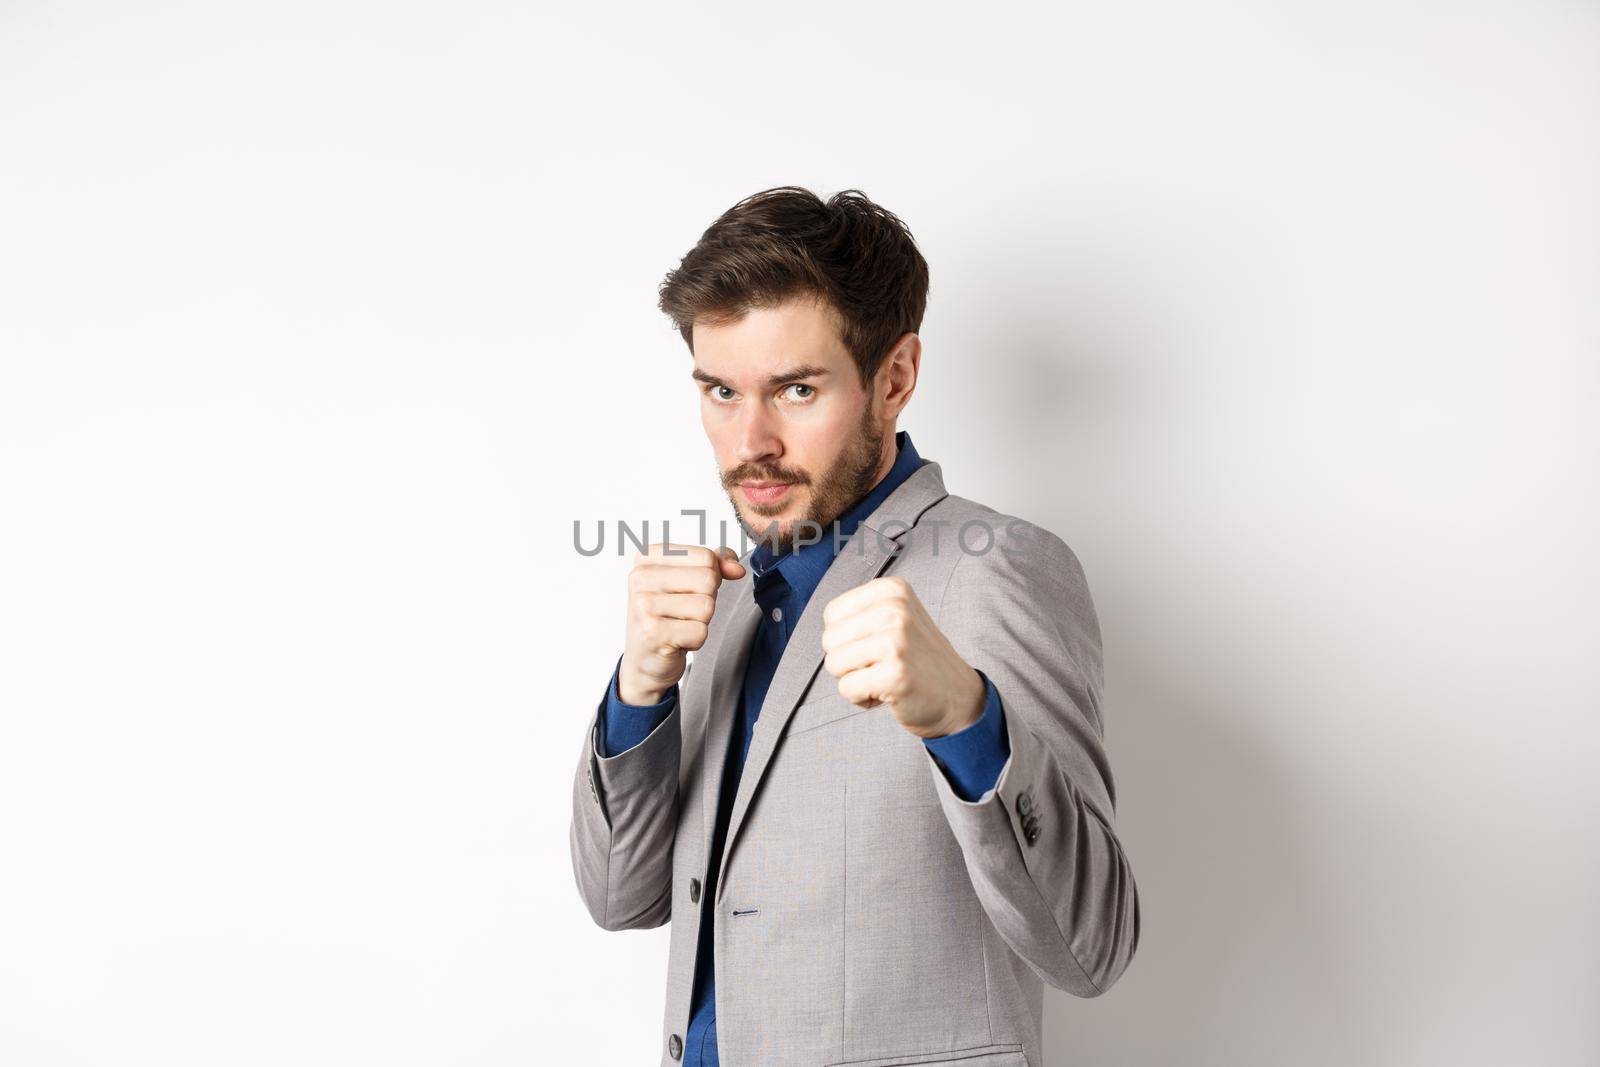 Serious man in suit raising hands in boxer pose, going to fight, looking confident, beckon to attack, standing on white background in defensive pose.